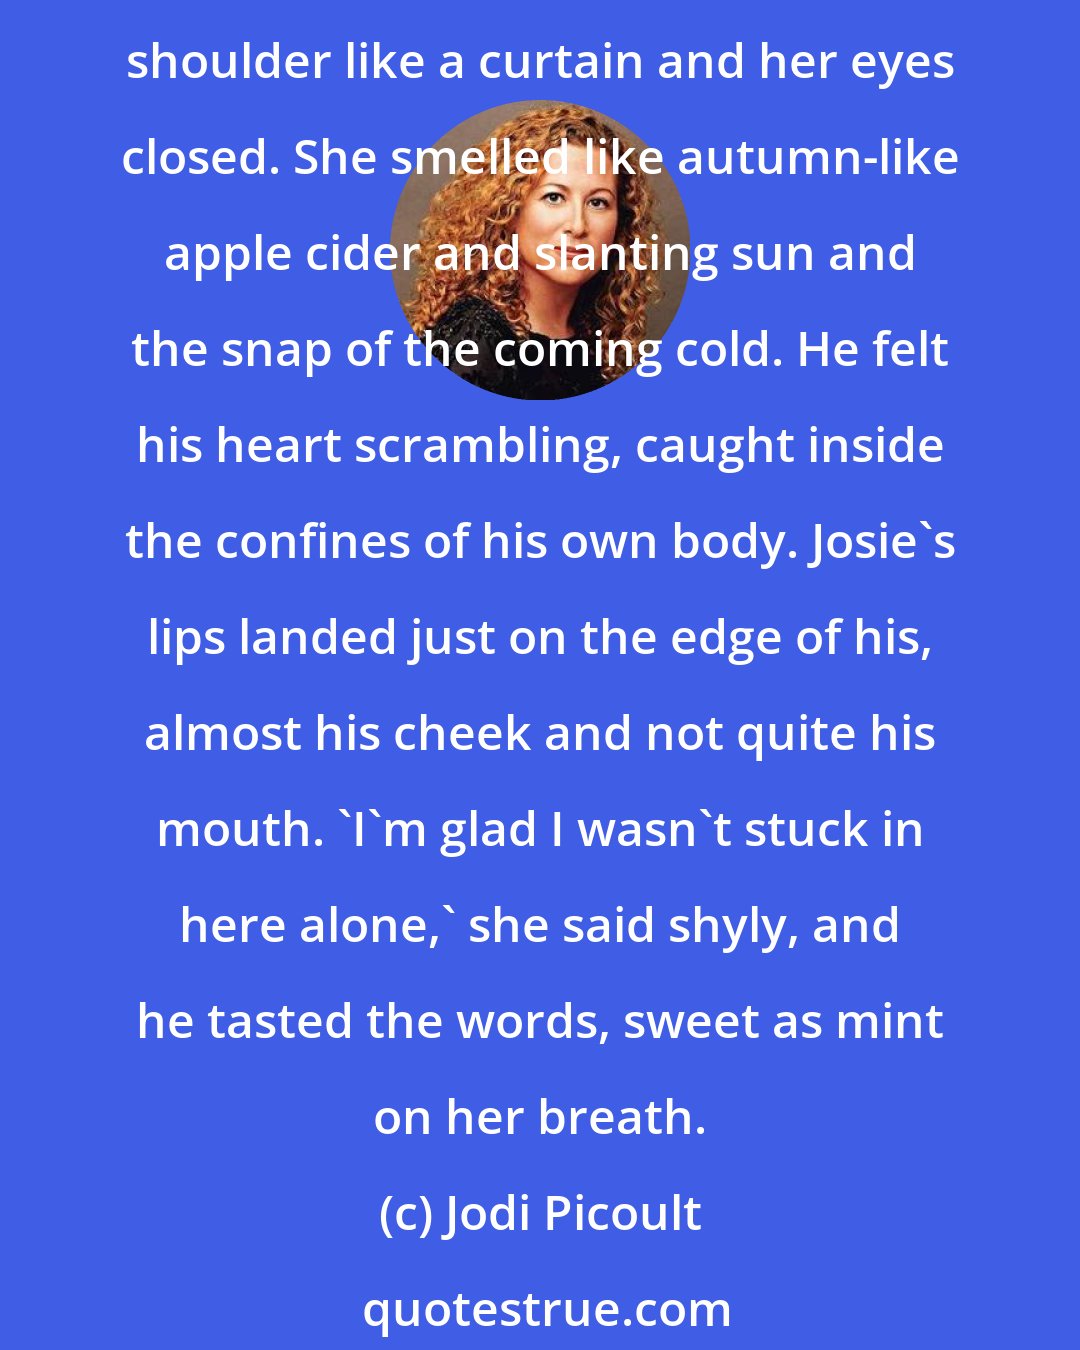 Jodi Picoult: Peter curled his hands into fists at his sides. 'Kiss me,' he said. She leaned towards him slowly, until her face was too close to be in focus. Her hair fell over Peter's shoulder like a curtain and her eyes closed. She smelled like autumn-like apple cider and slanting sun and the snap of the coming cold. He felt his heart scrambling, caught inside the confines of his own body. Josie's lips landed just on the edge of his, almost his cheek and not quite his mouth. 'I'm glad I wasn't stuck in here alone,' she said shyly, and he tasted the words, sweet as mint on her breath.